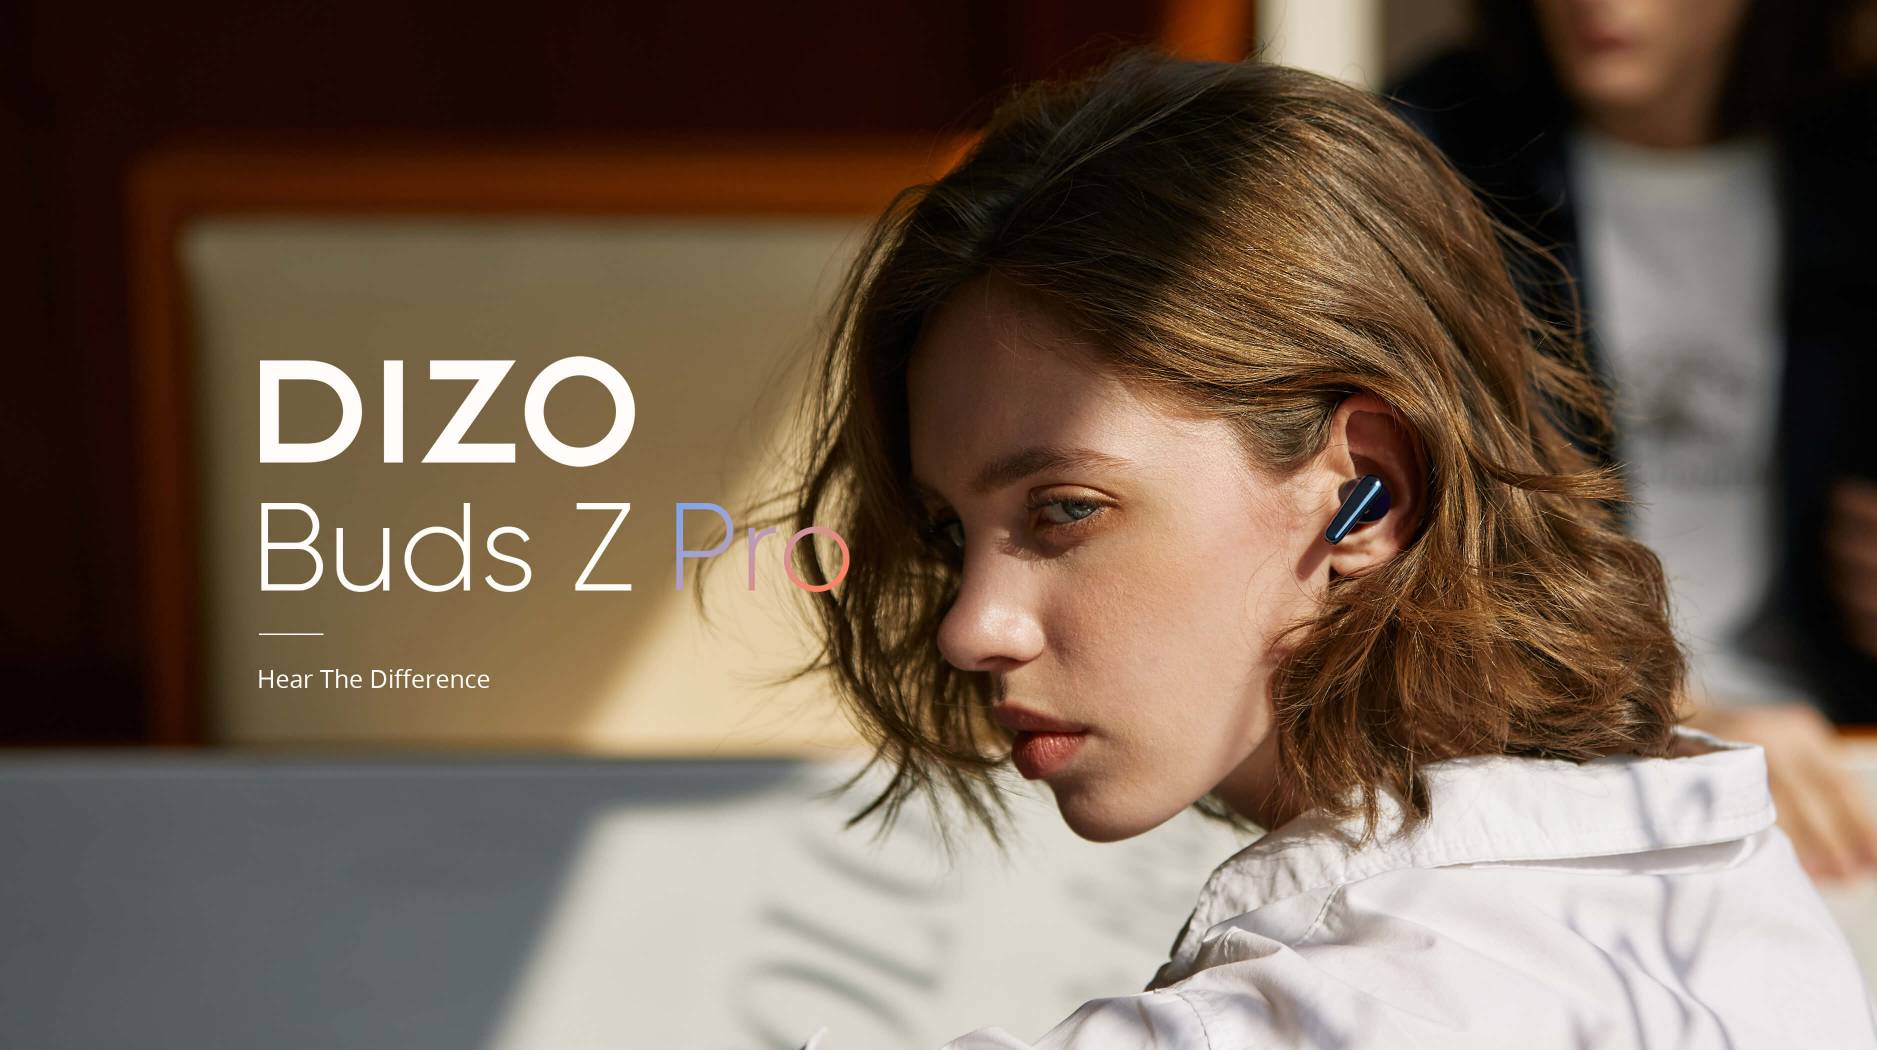 Realme DIZO Buds Z Pro: wireless headphones with active noise canceling and 25 hours of battery life for $ 30